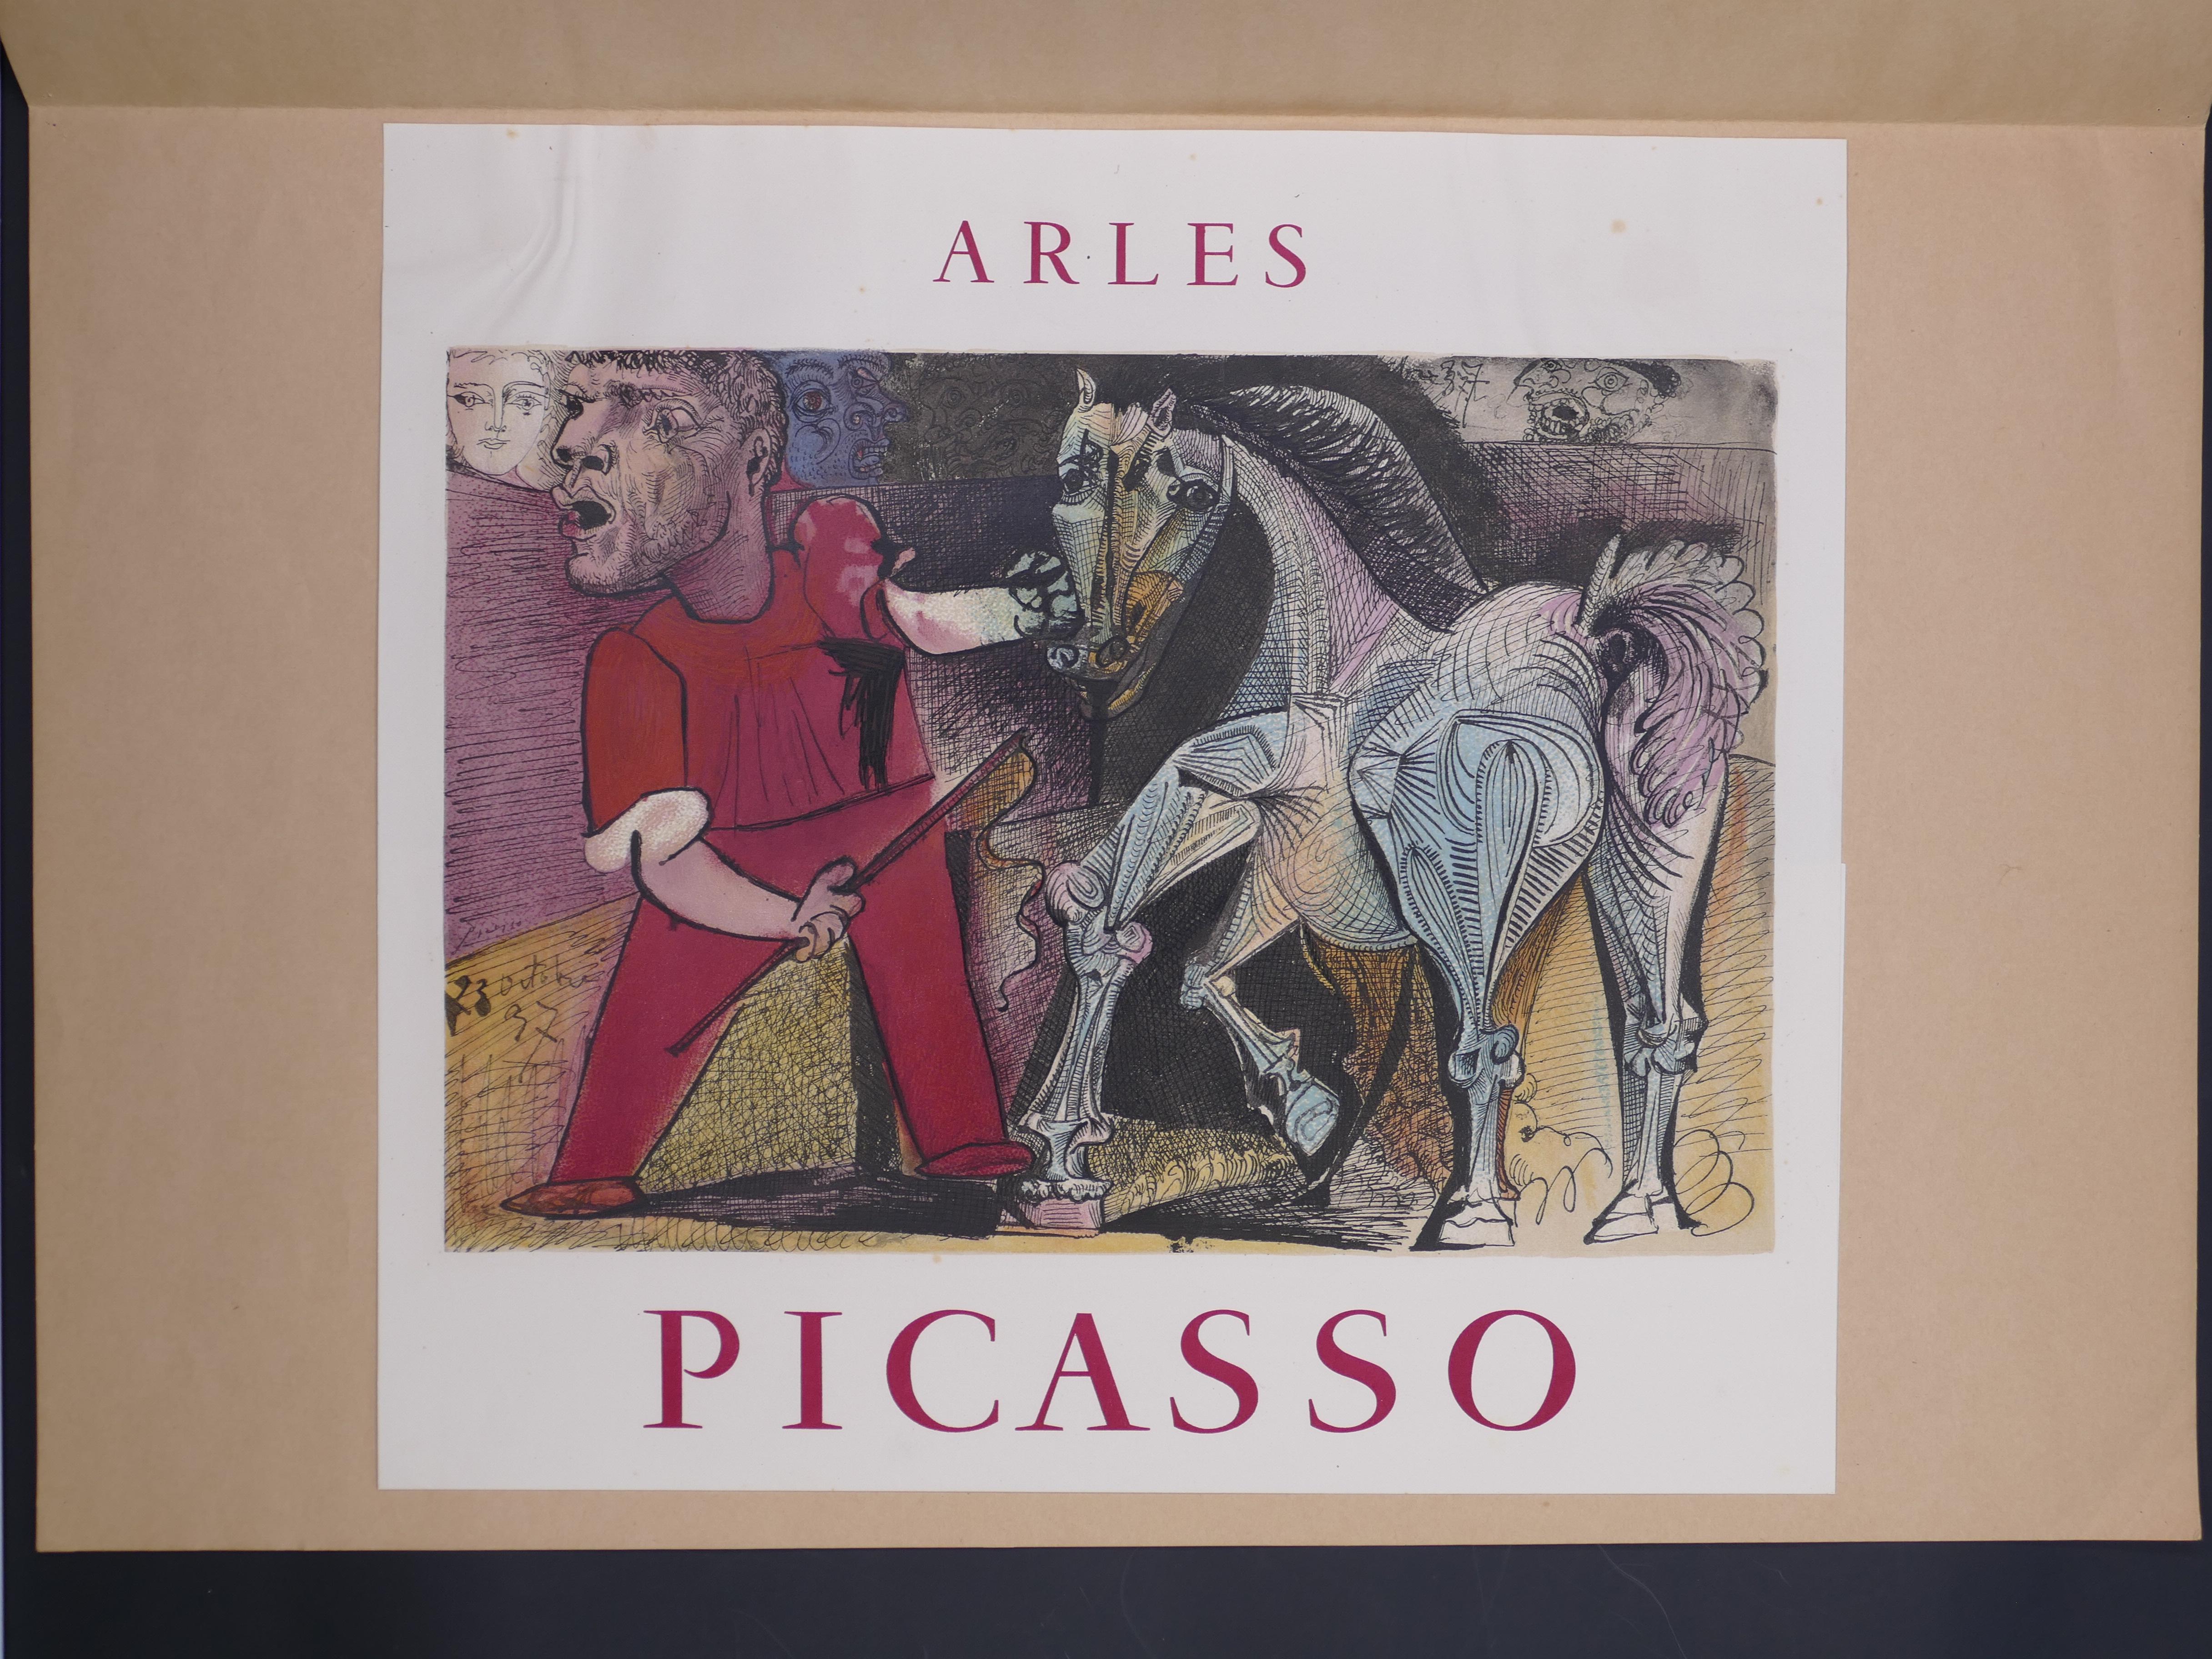 Picasso Vintage Exhibition Poster in Arles - 1957 - Gray Figurative Print by (after) Pablo Picasso